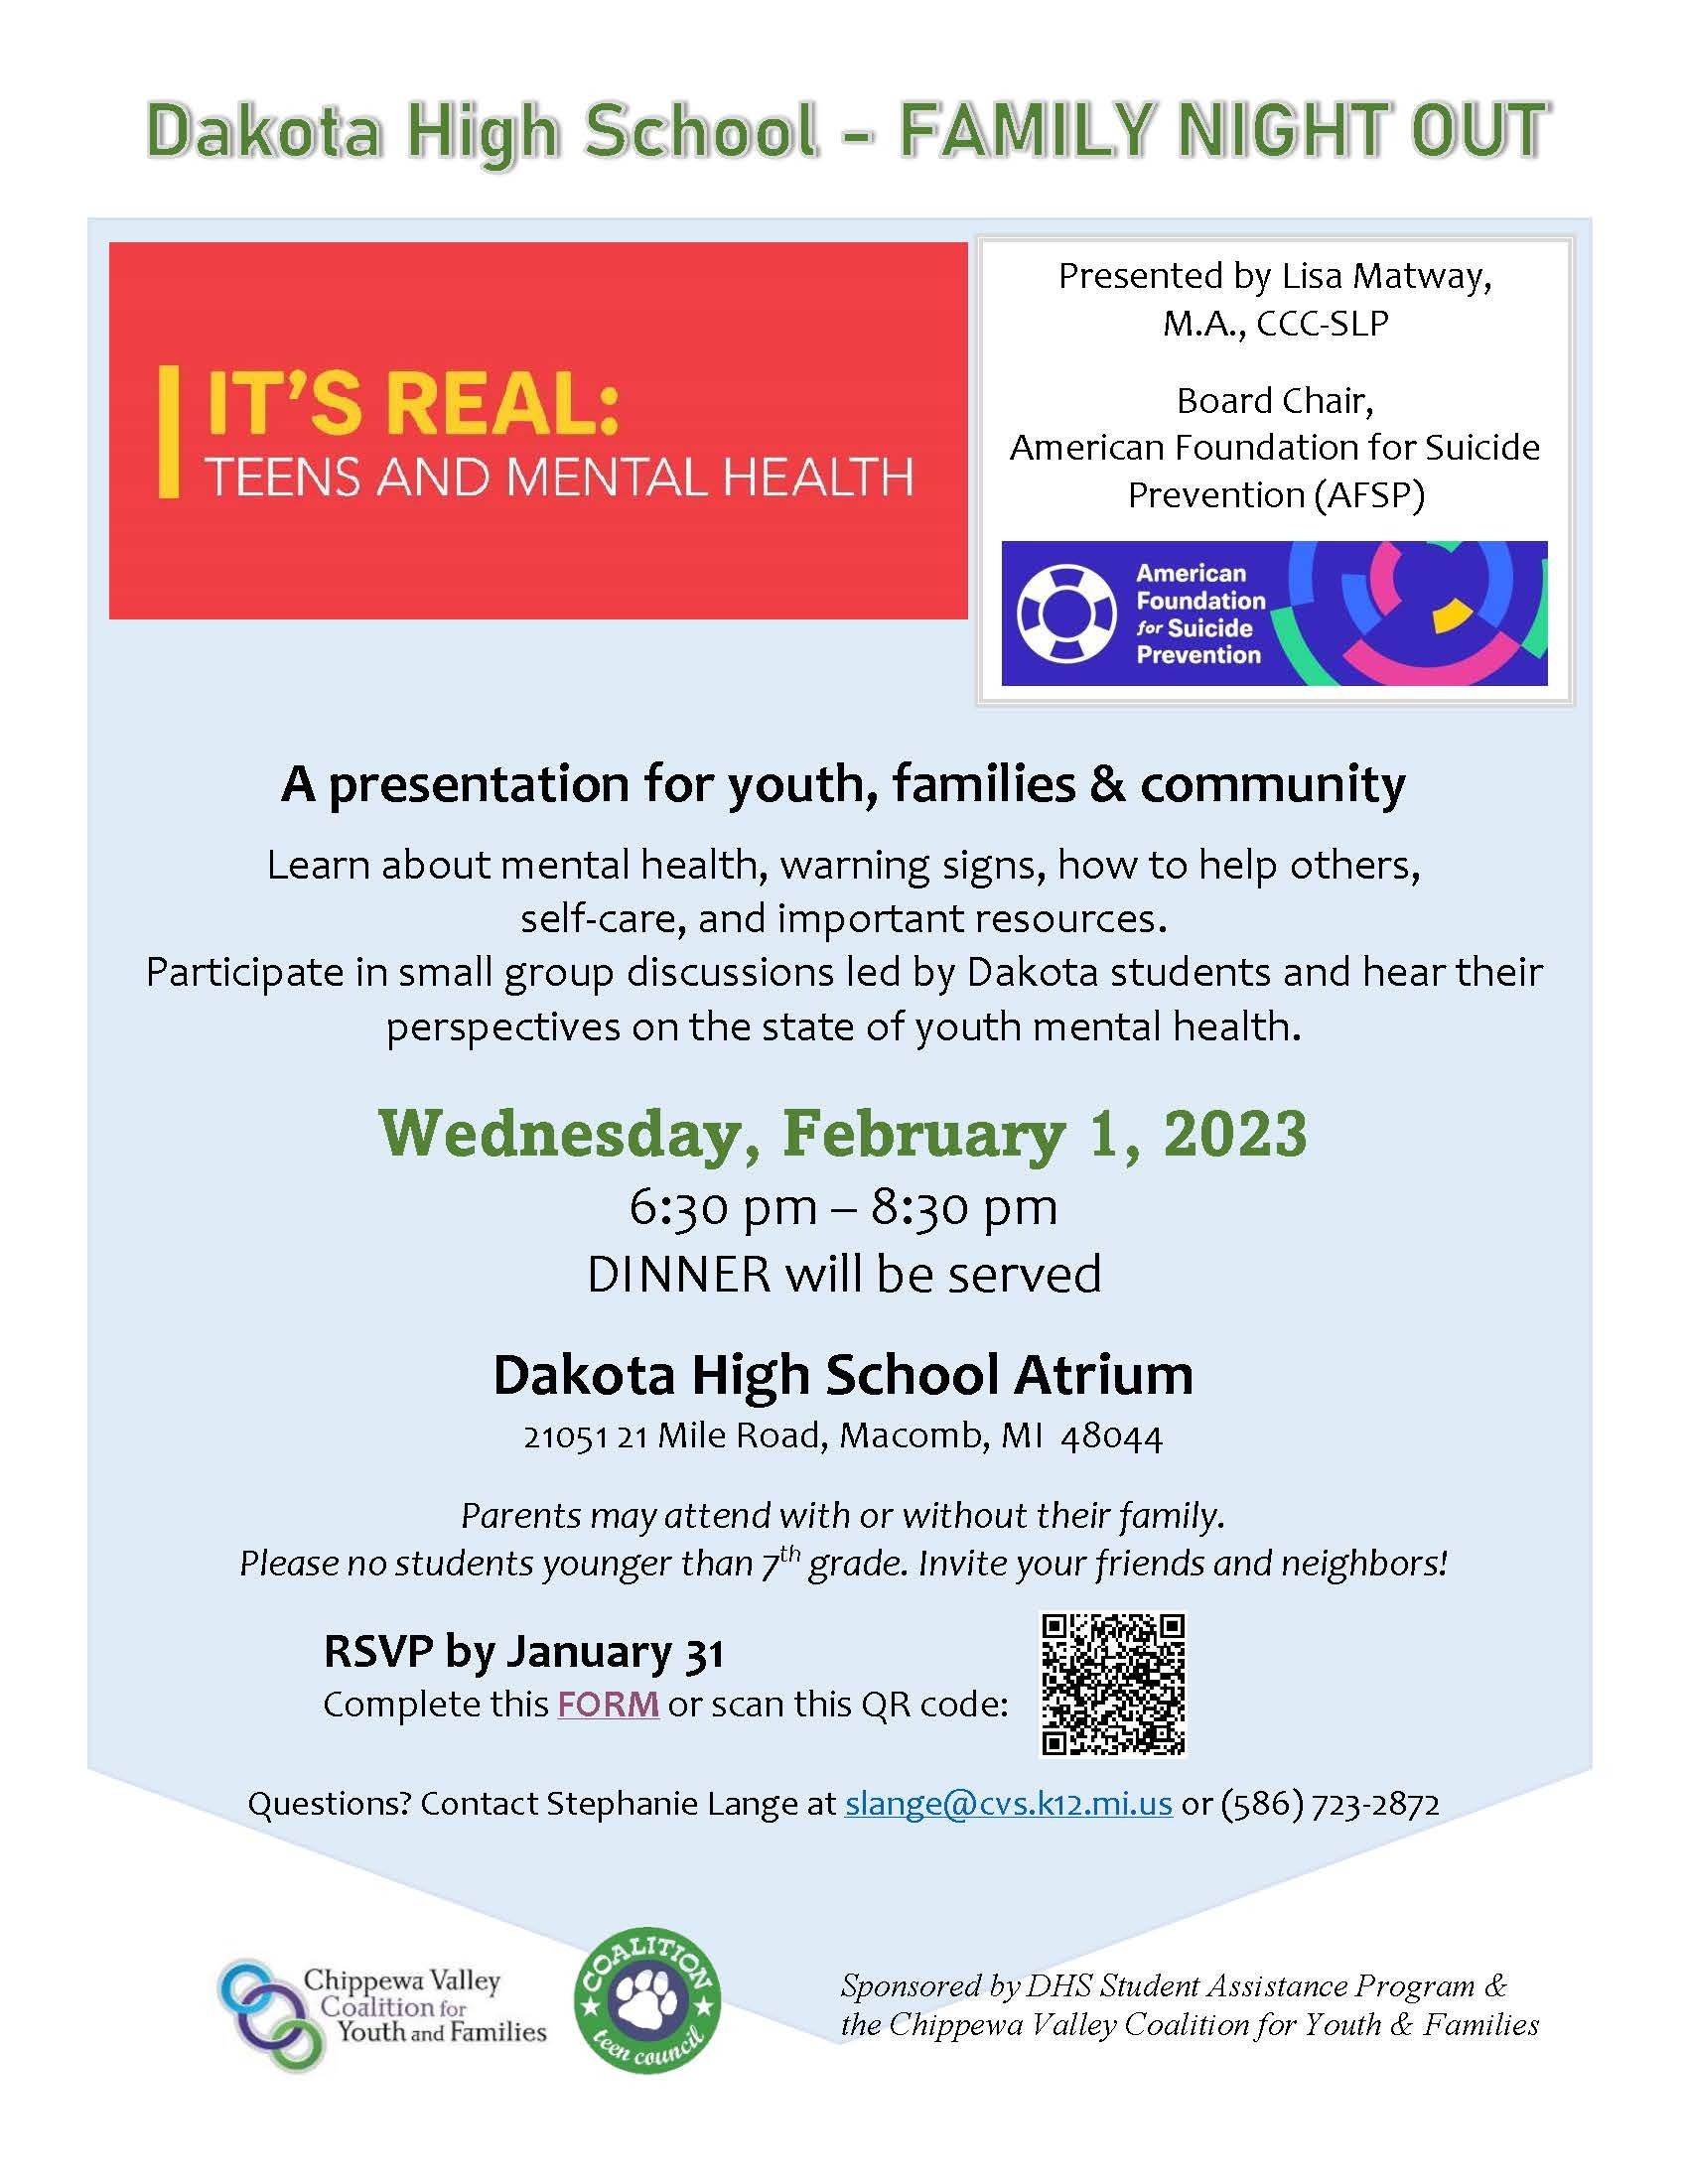 Family Night Out flyer--Teens & Mental Health